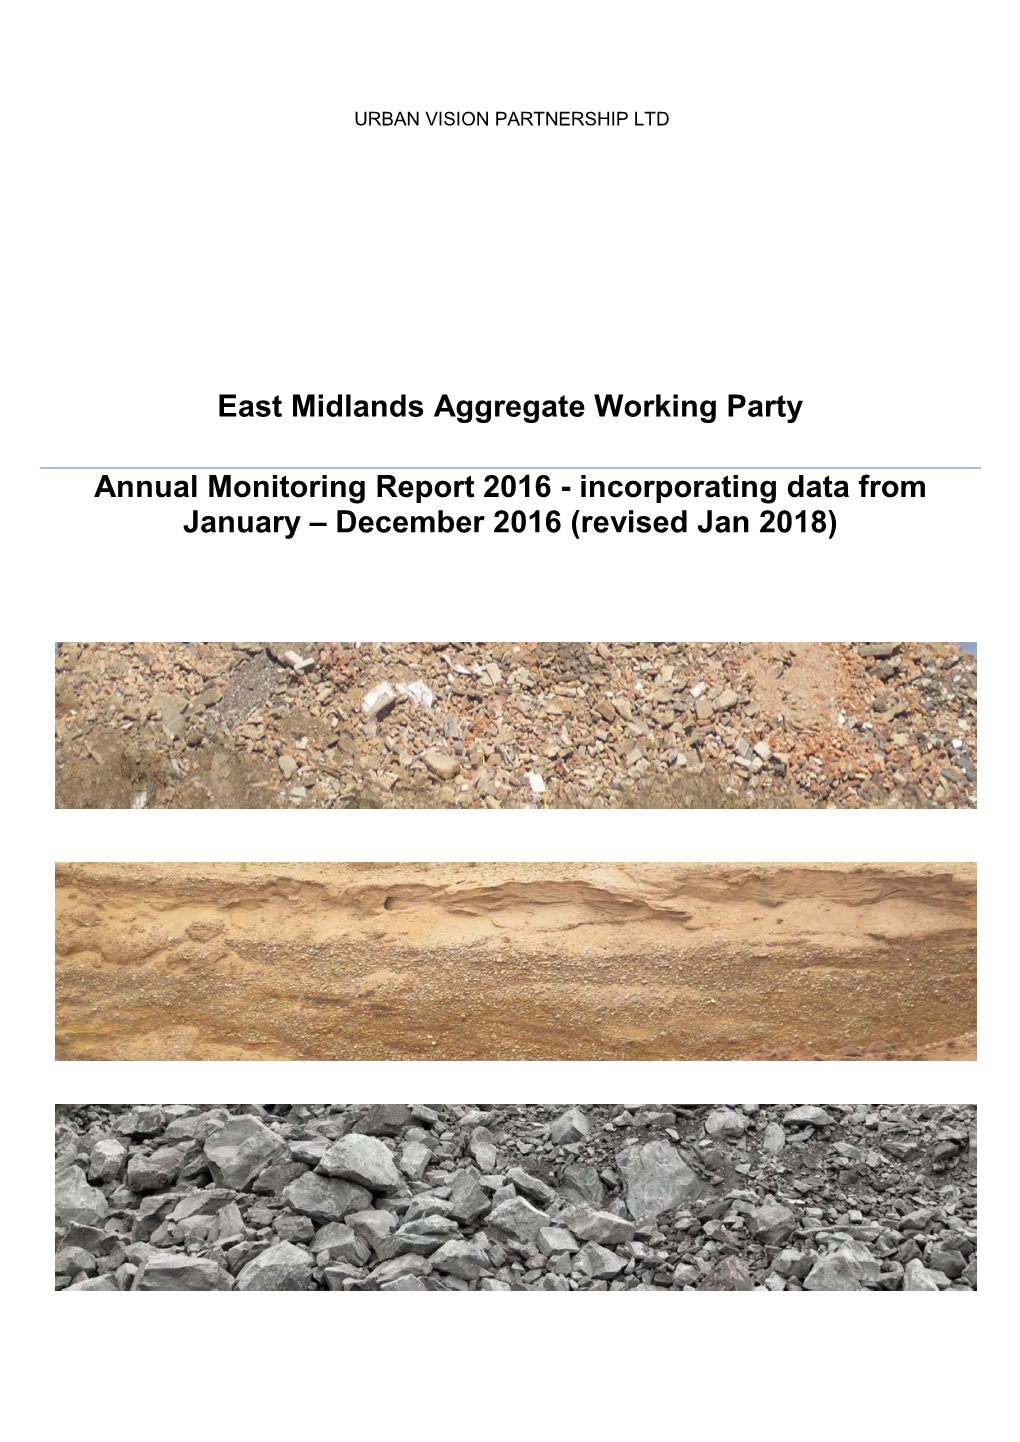 East Midlands Aggregates Working Party: Annual Report 2016